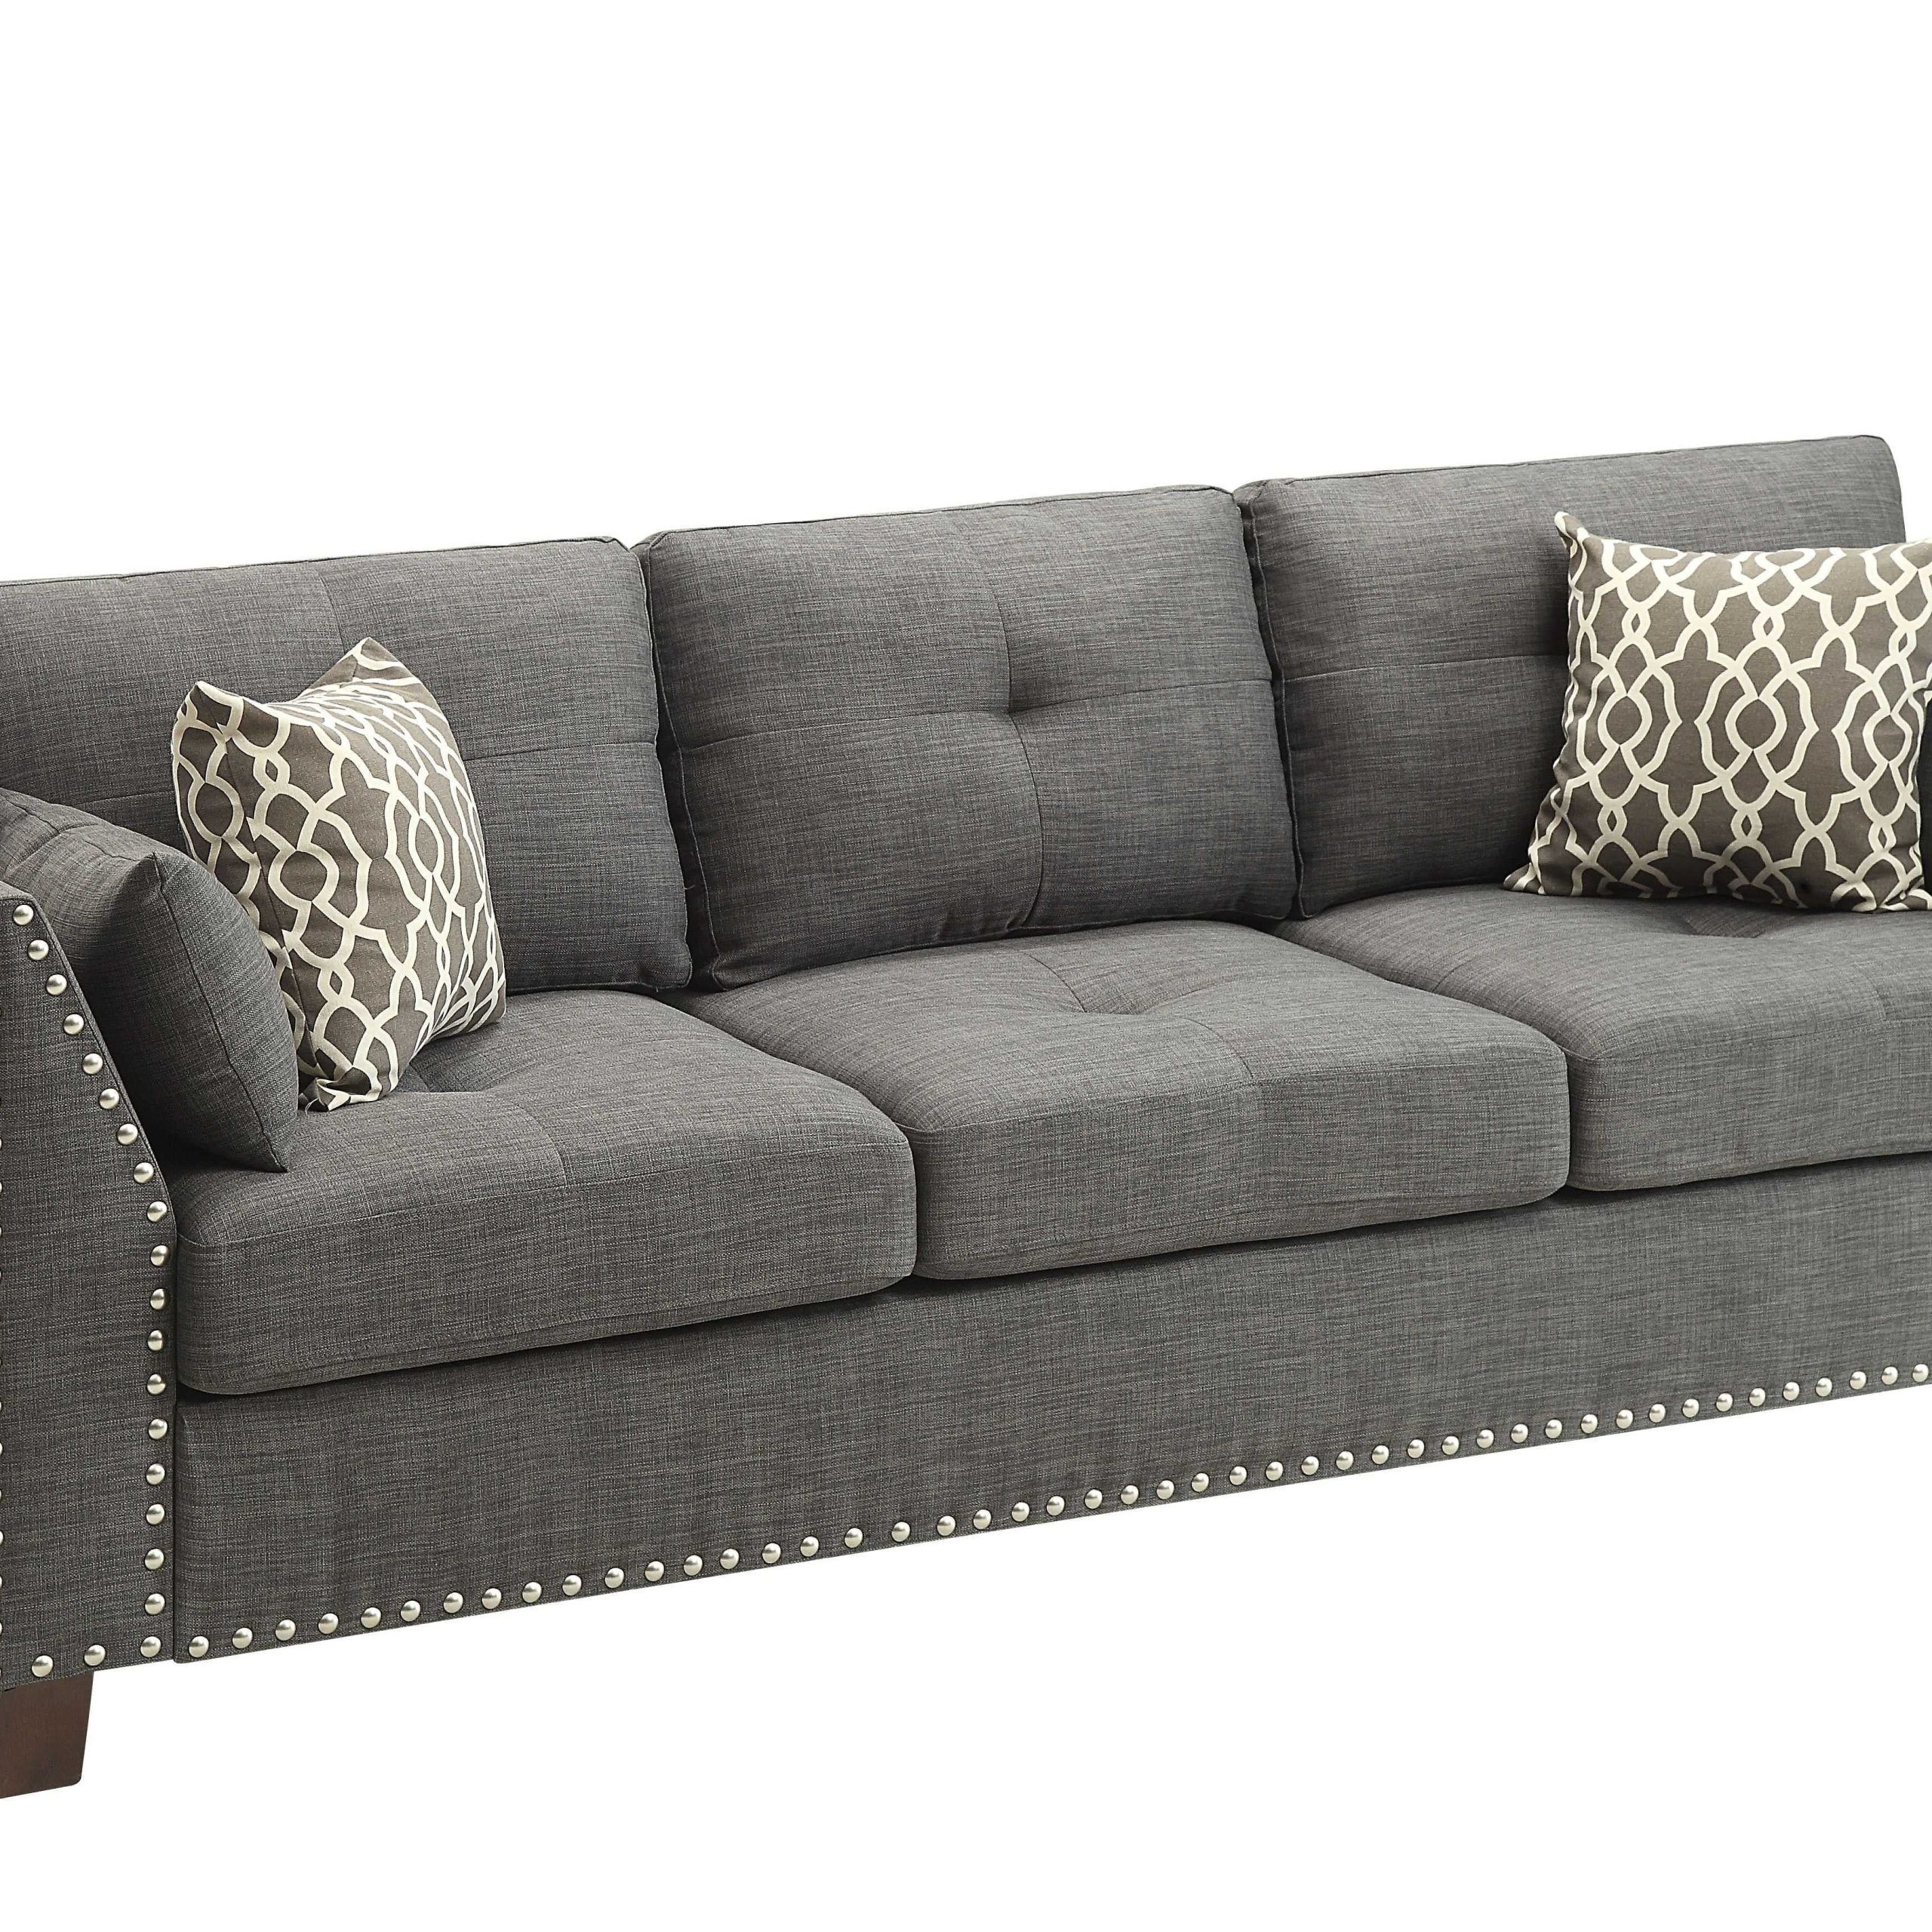 Sofa In Light Charcoal Linen – Linen, Eucalyptus, Plywood, Foam With Regard To Light Charcoal Linen Sofas (View 5 of 20)